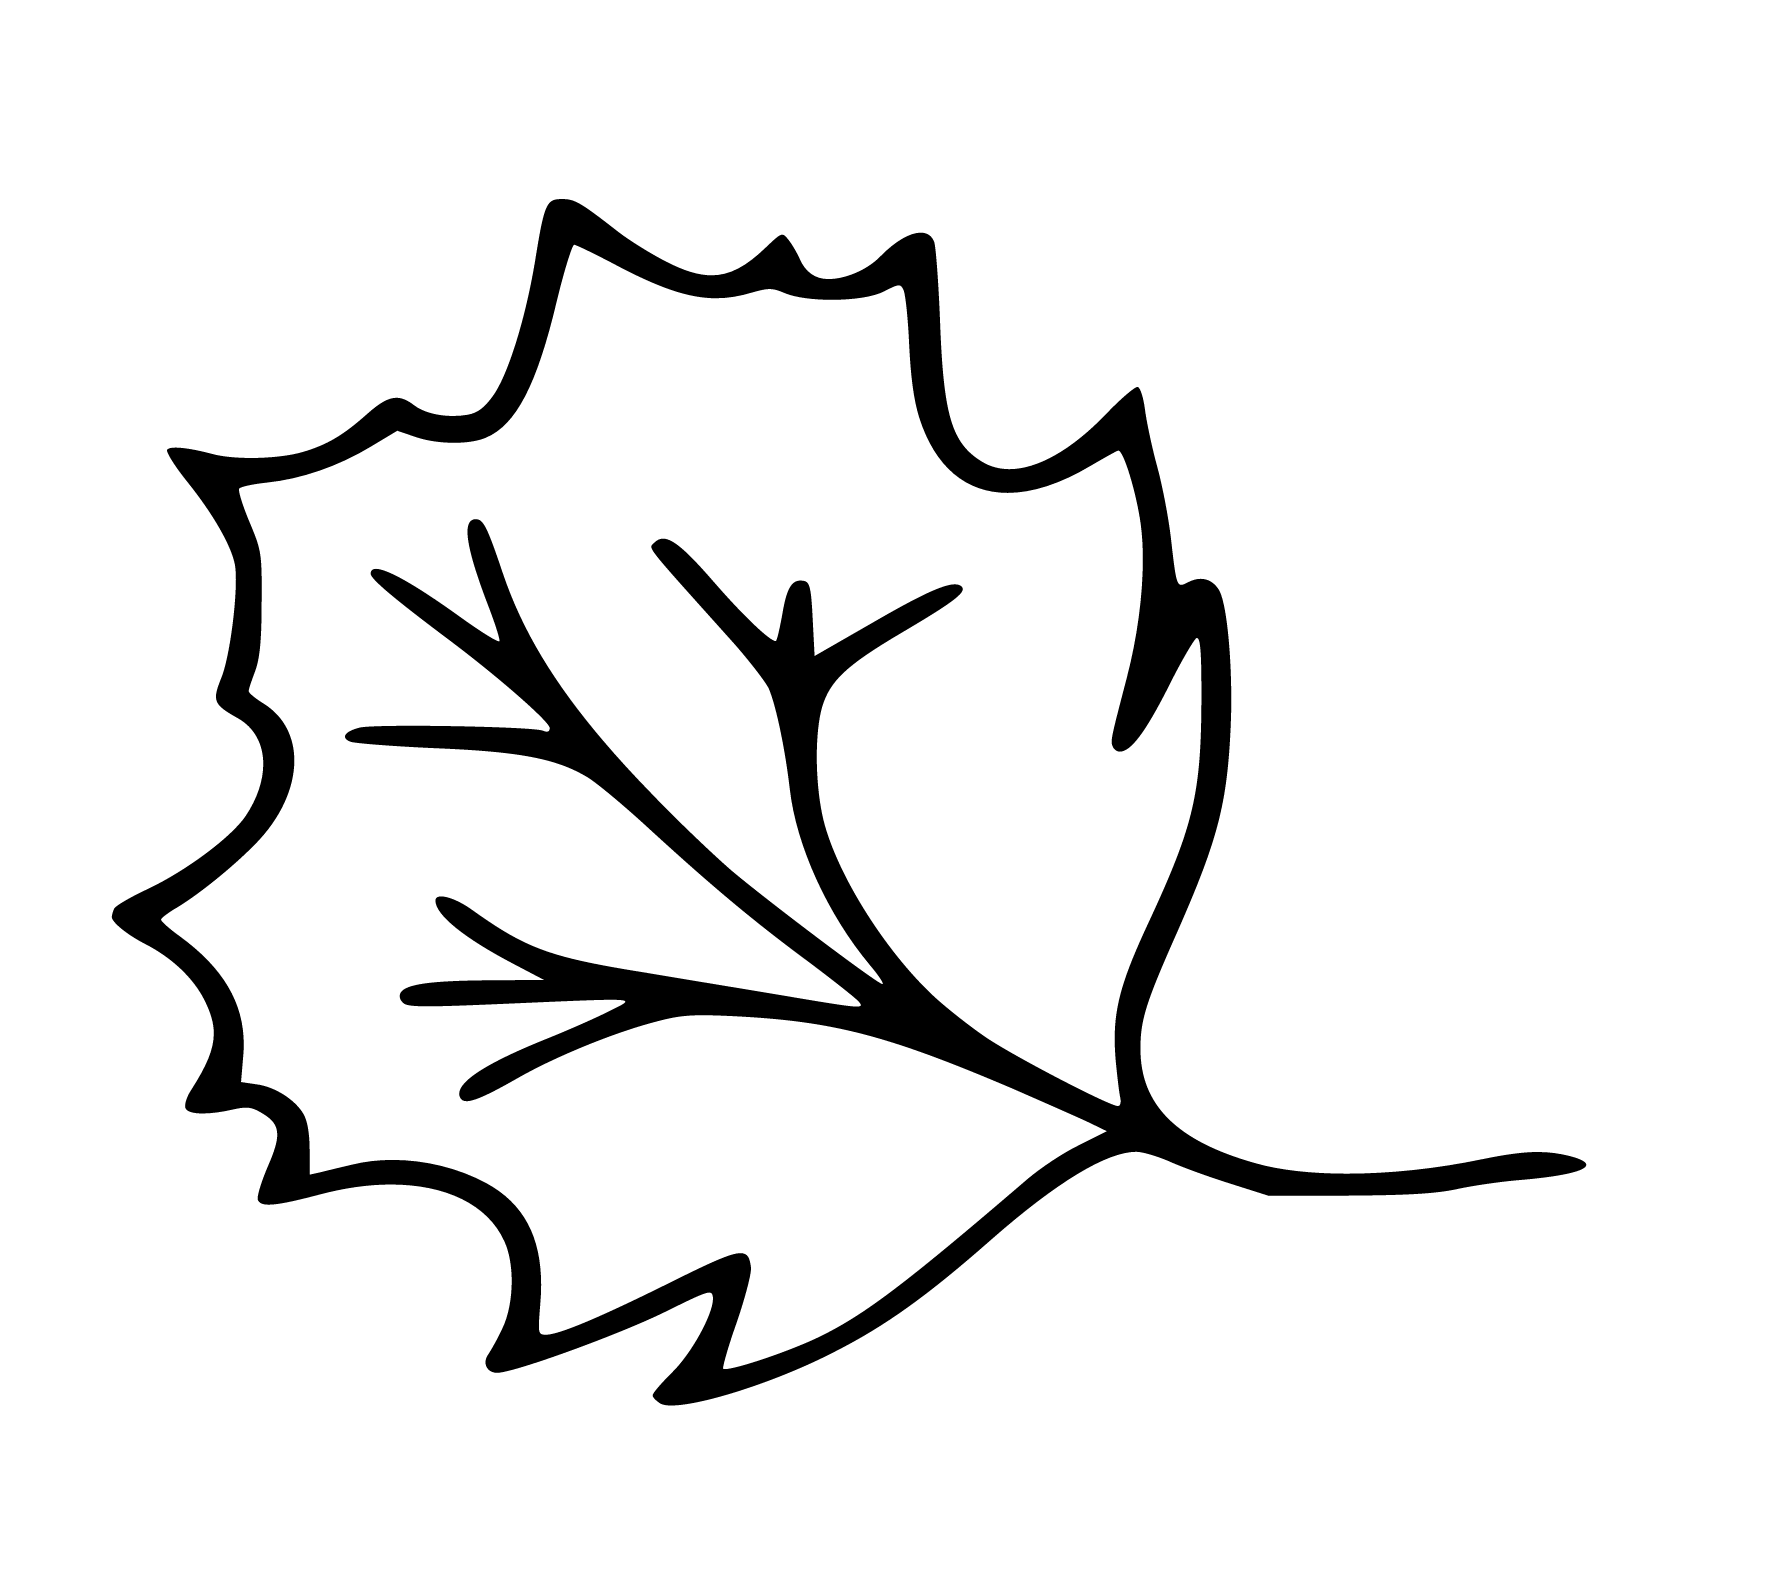 Leaf of Maple Tree Coloring Page Printable for Kids, Free, Simple and Easy, as PDF